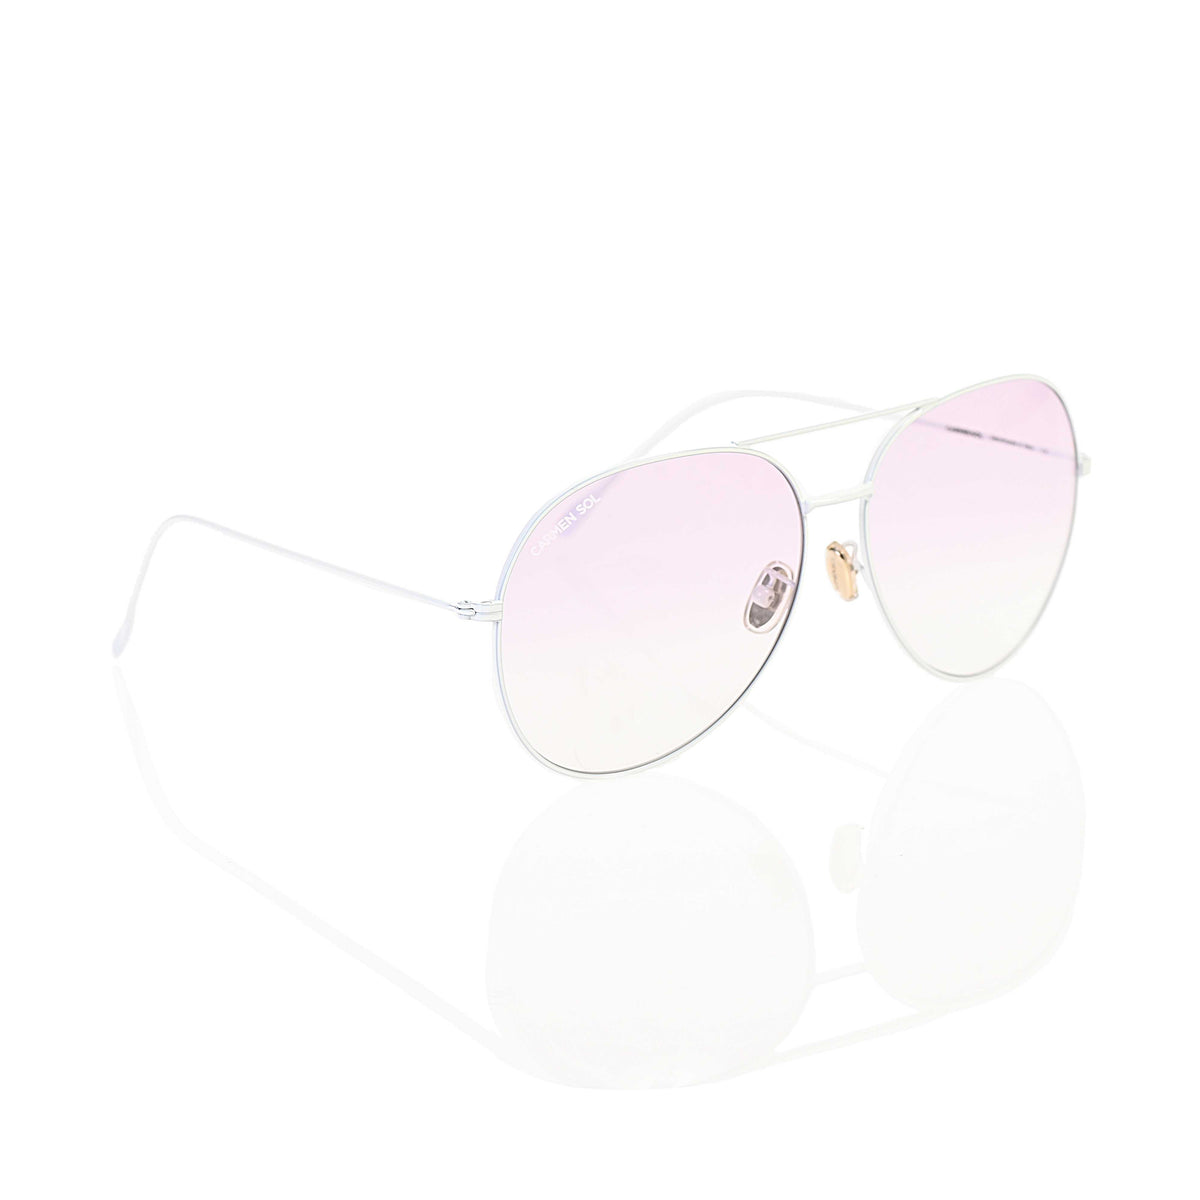 Purple shades with white frame aviator sunglasses perfect for beach summer mode